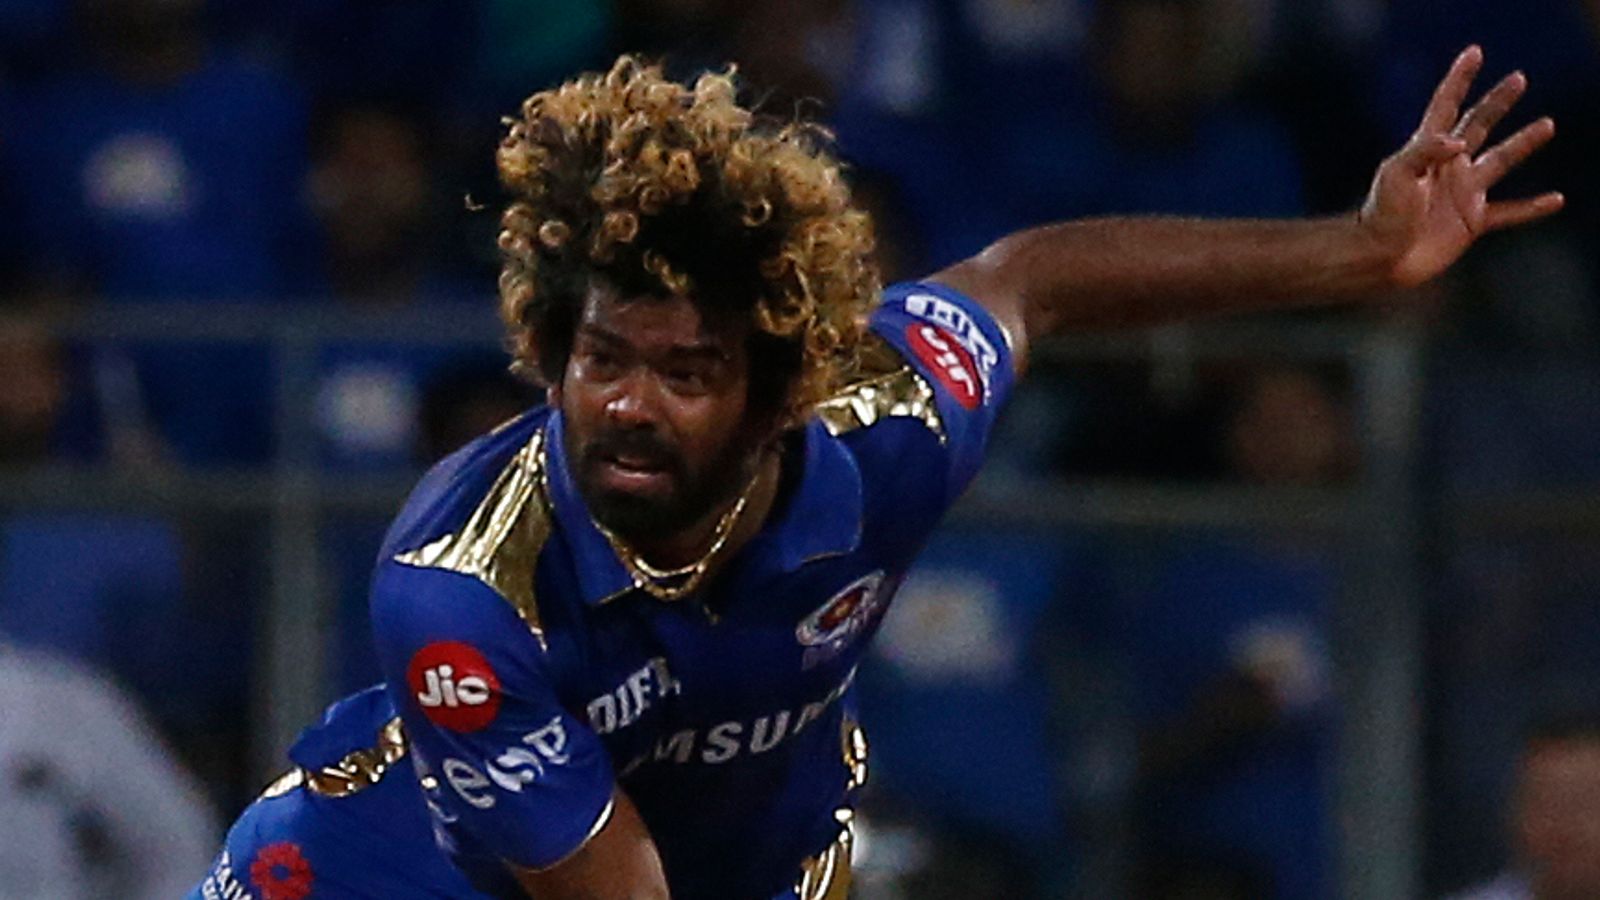 IPL 2021 10 stats you might not be aware of ahead of new season Cricket News Sky Sports